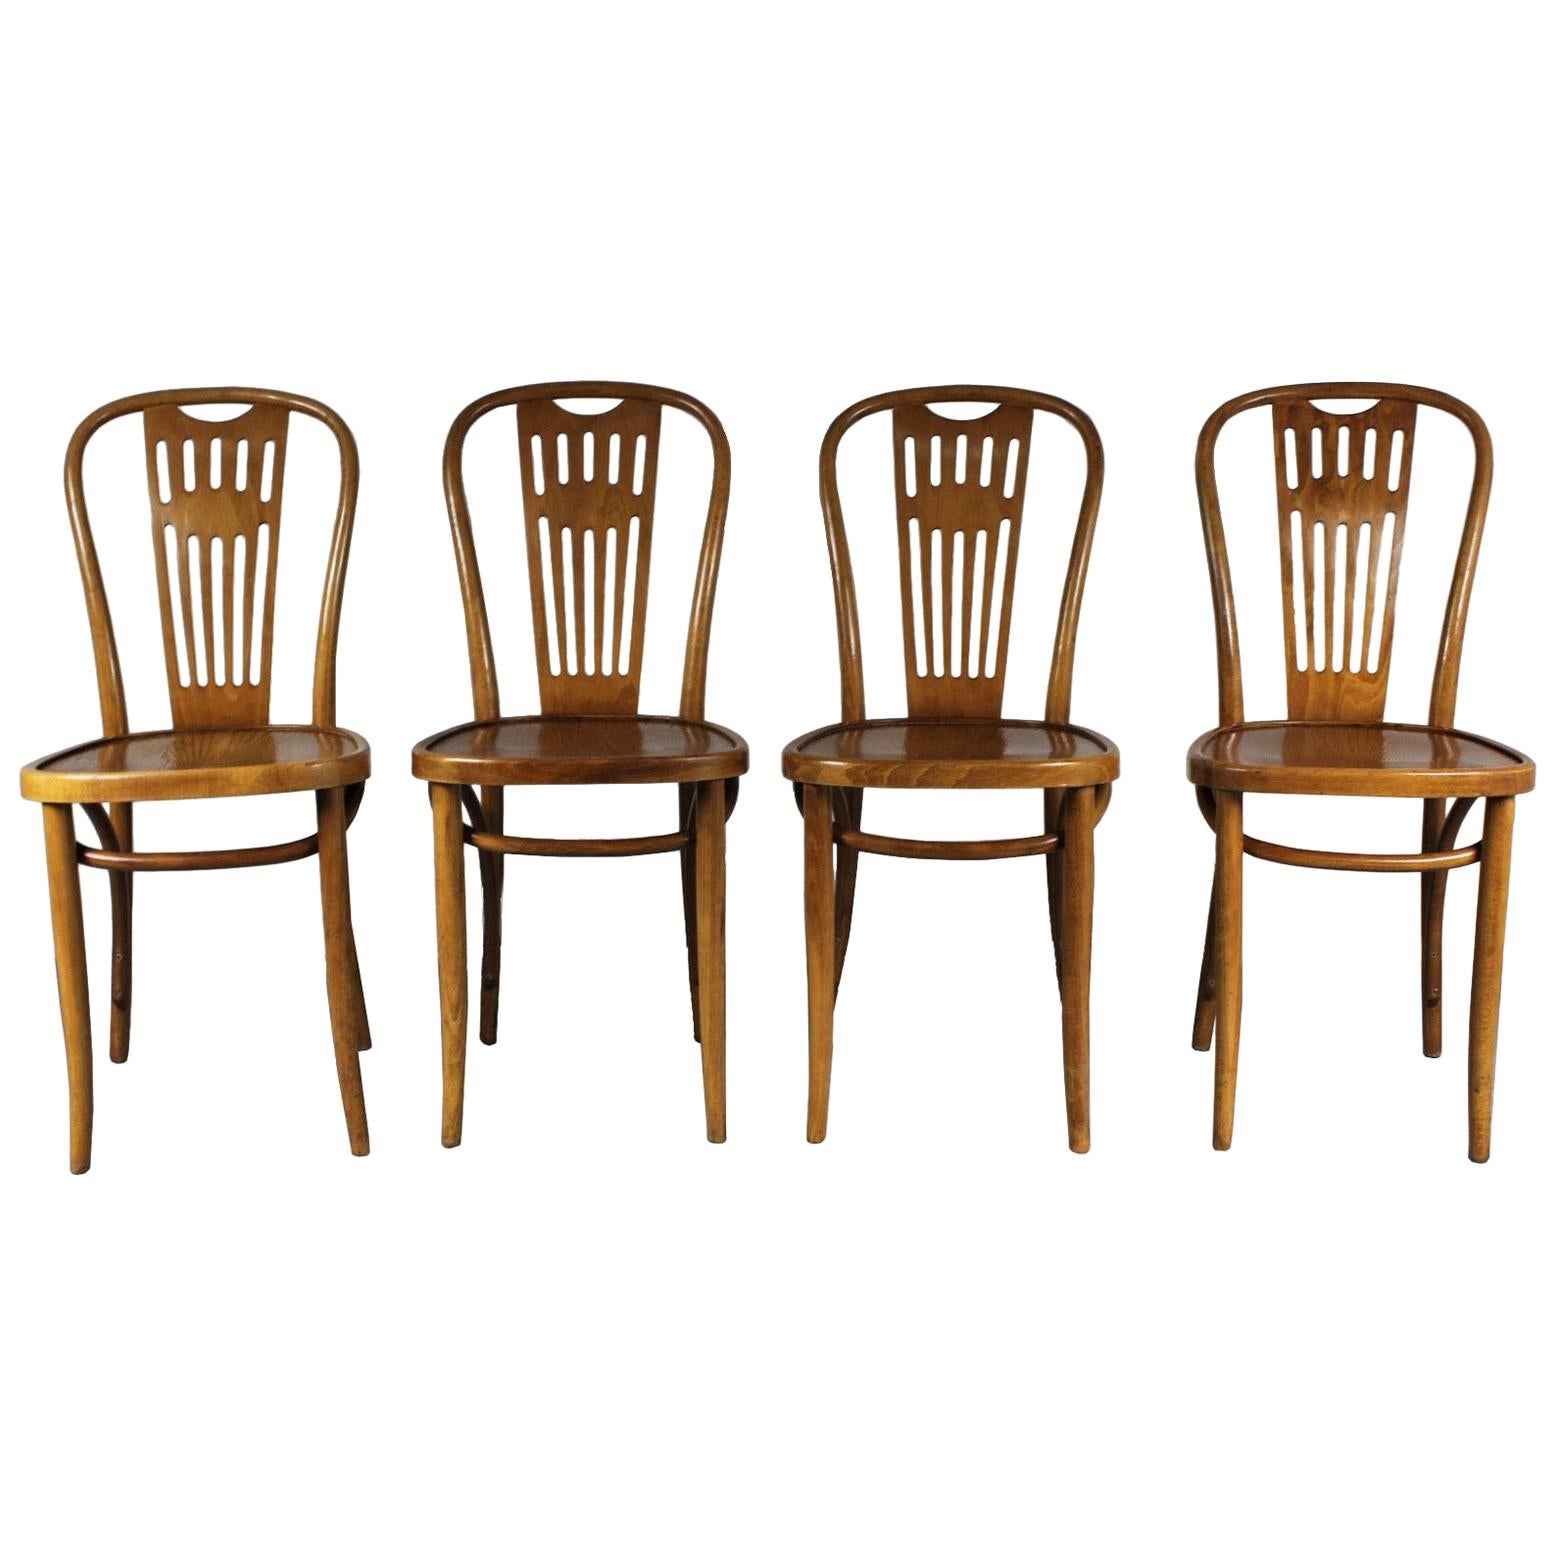 1950s Set of Four Bistro Chairs, Thonet